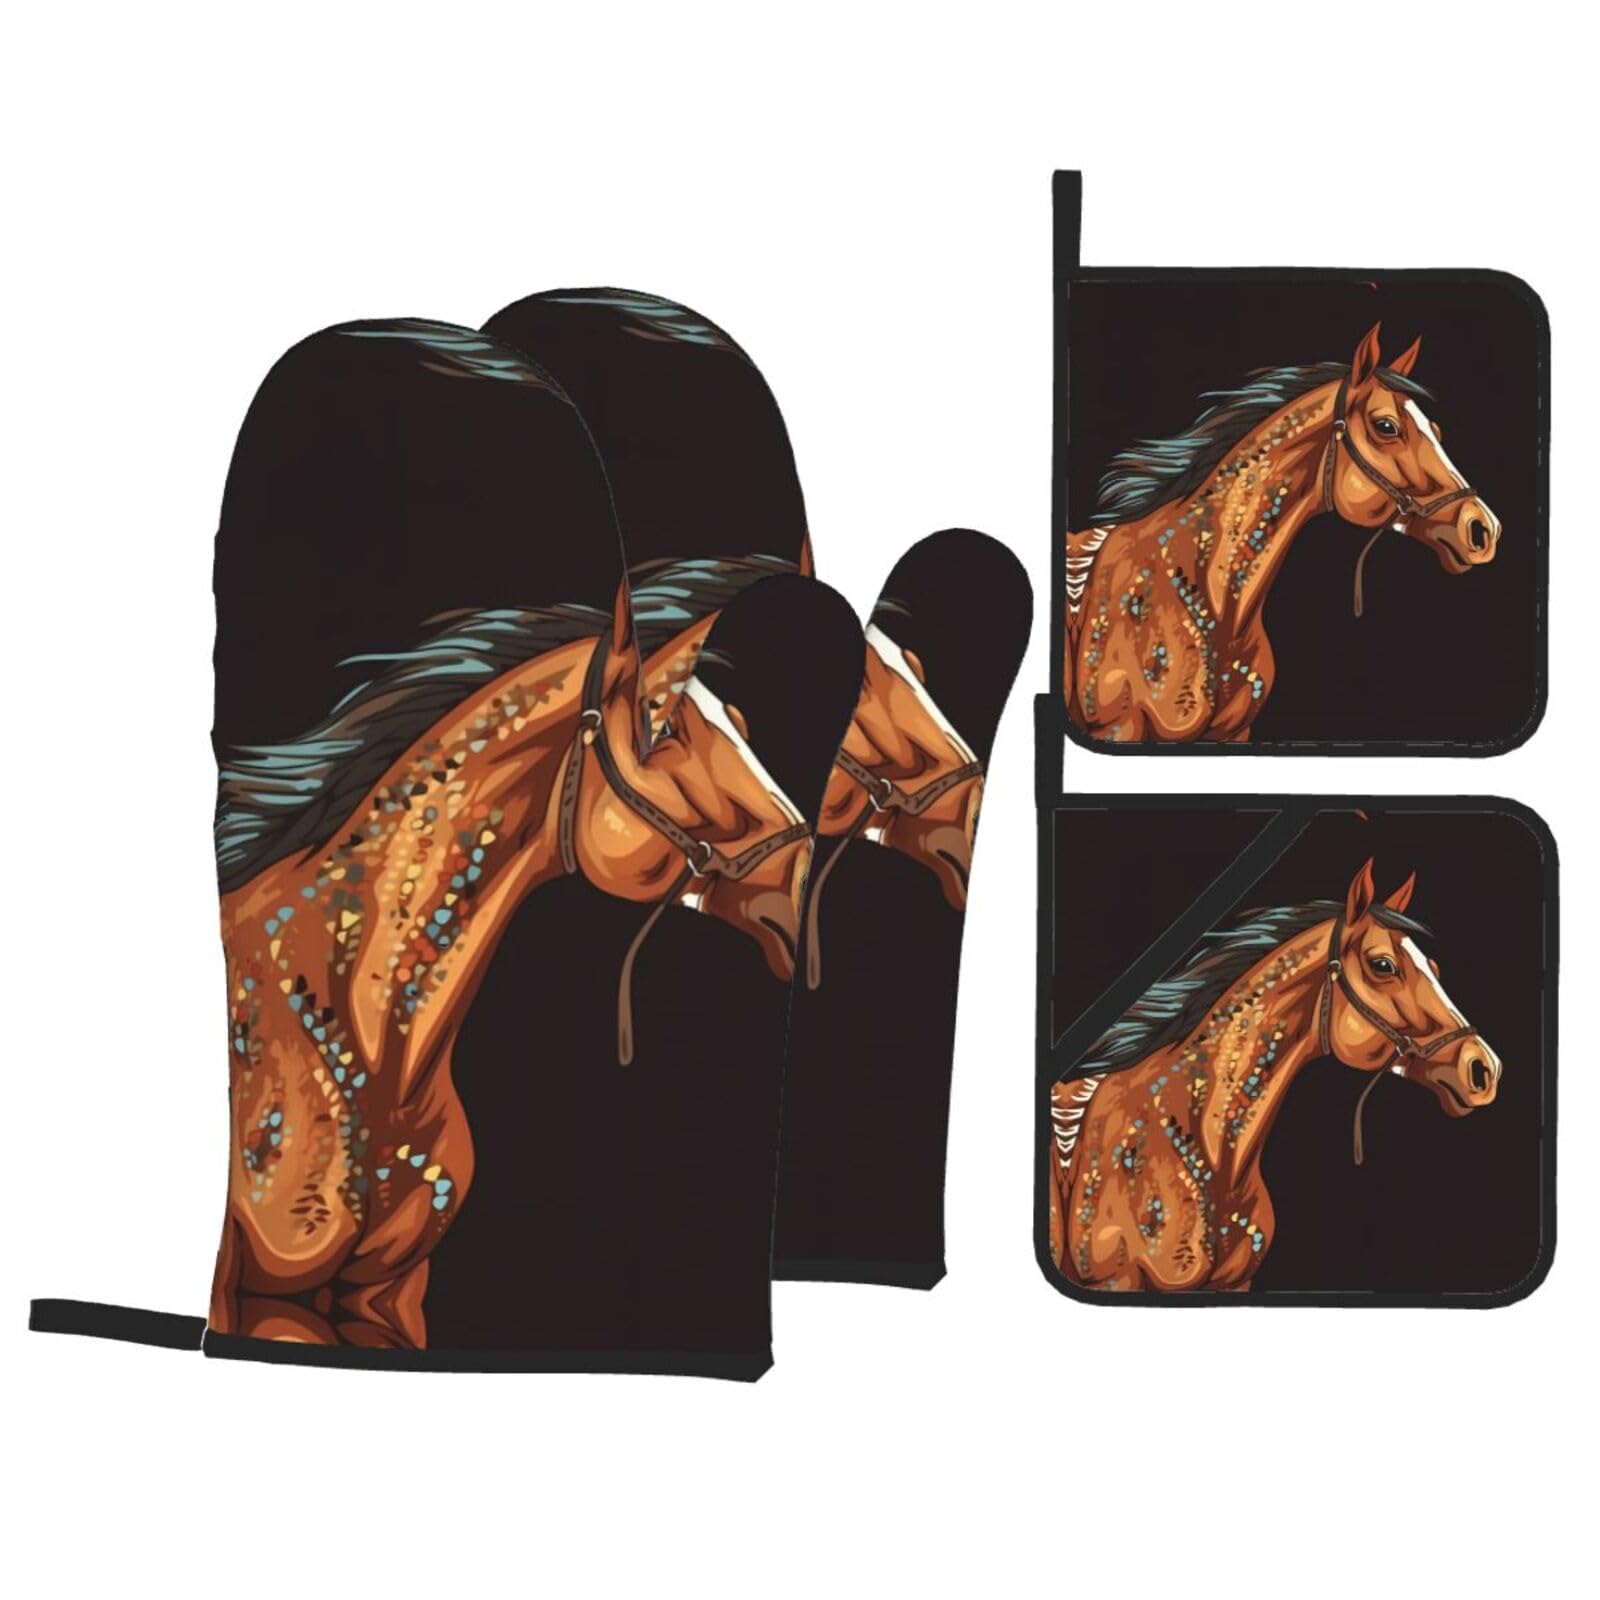 Oven Mitts and Pot Holders Set of 4 Brown Horse Print Kitchen Oven Glove Fashion Heat Resistant Oven Gloves Set for BBQ Grill Baking Cooking Oven Microwave